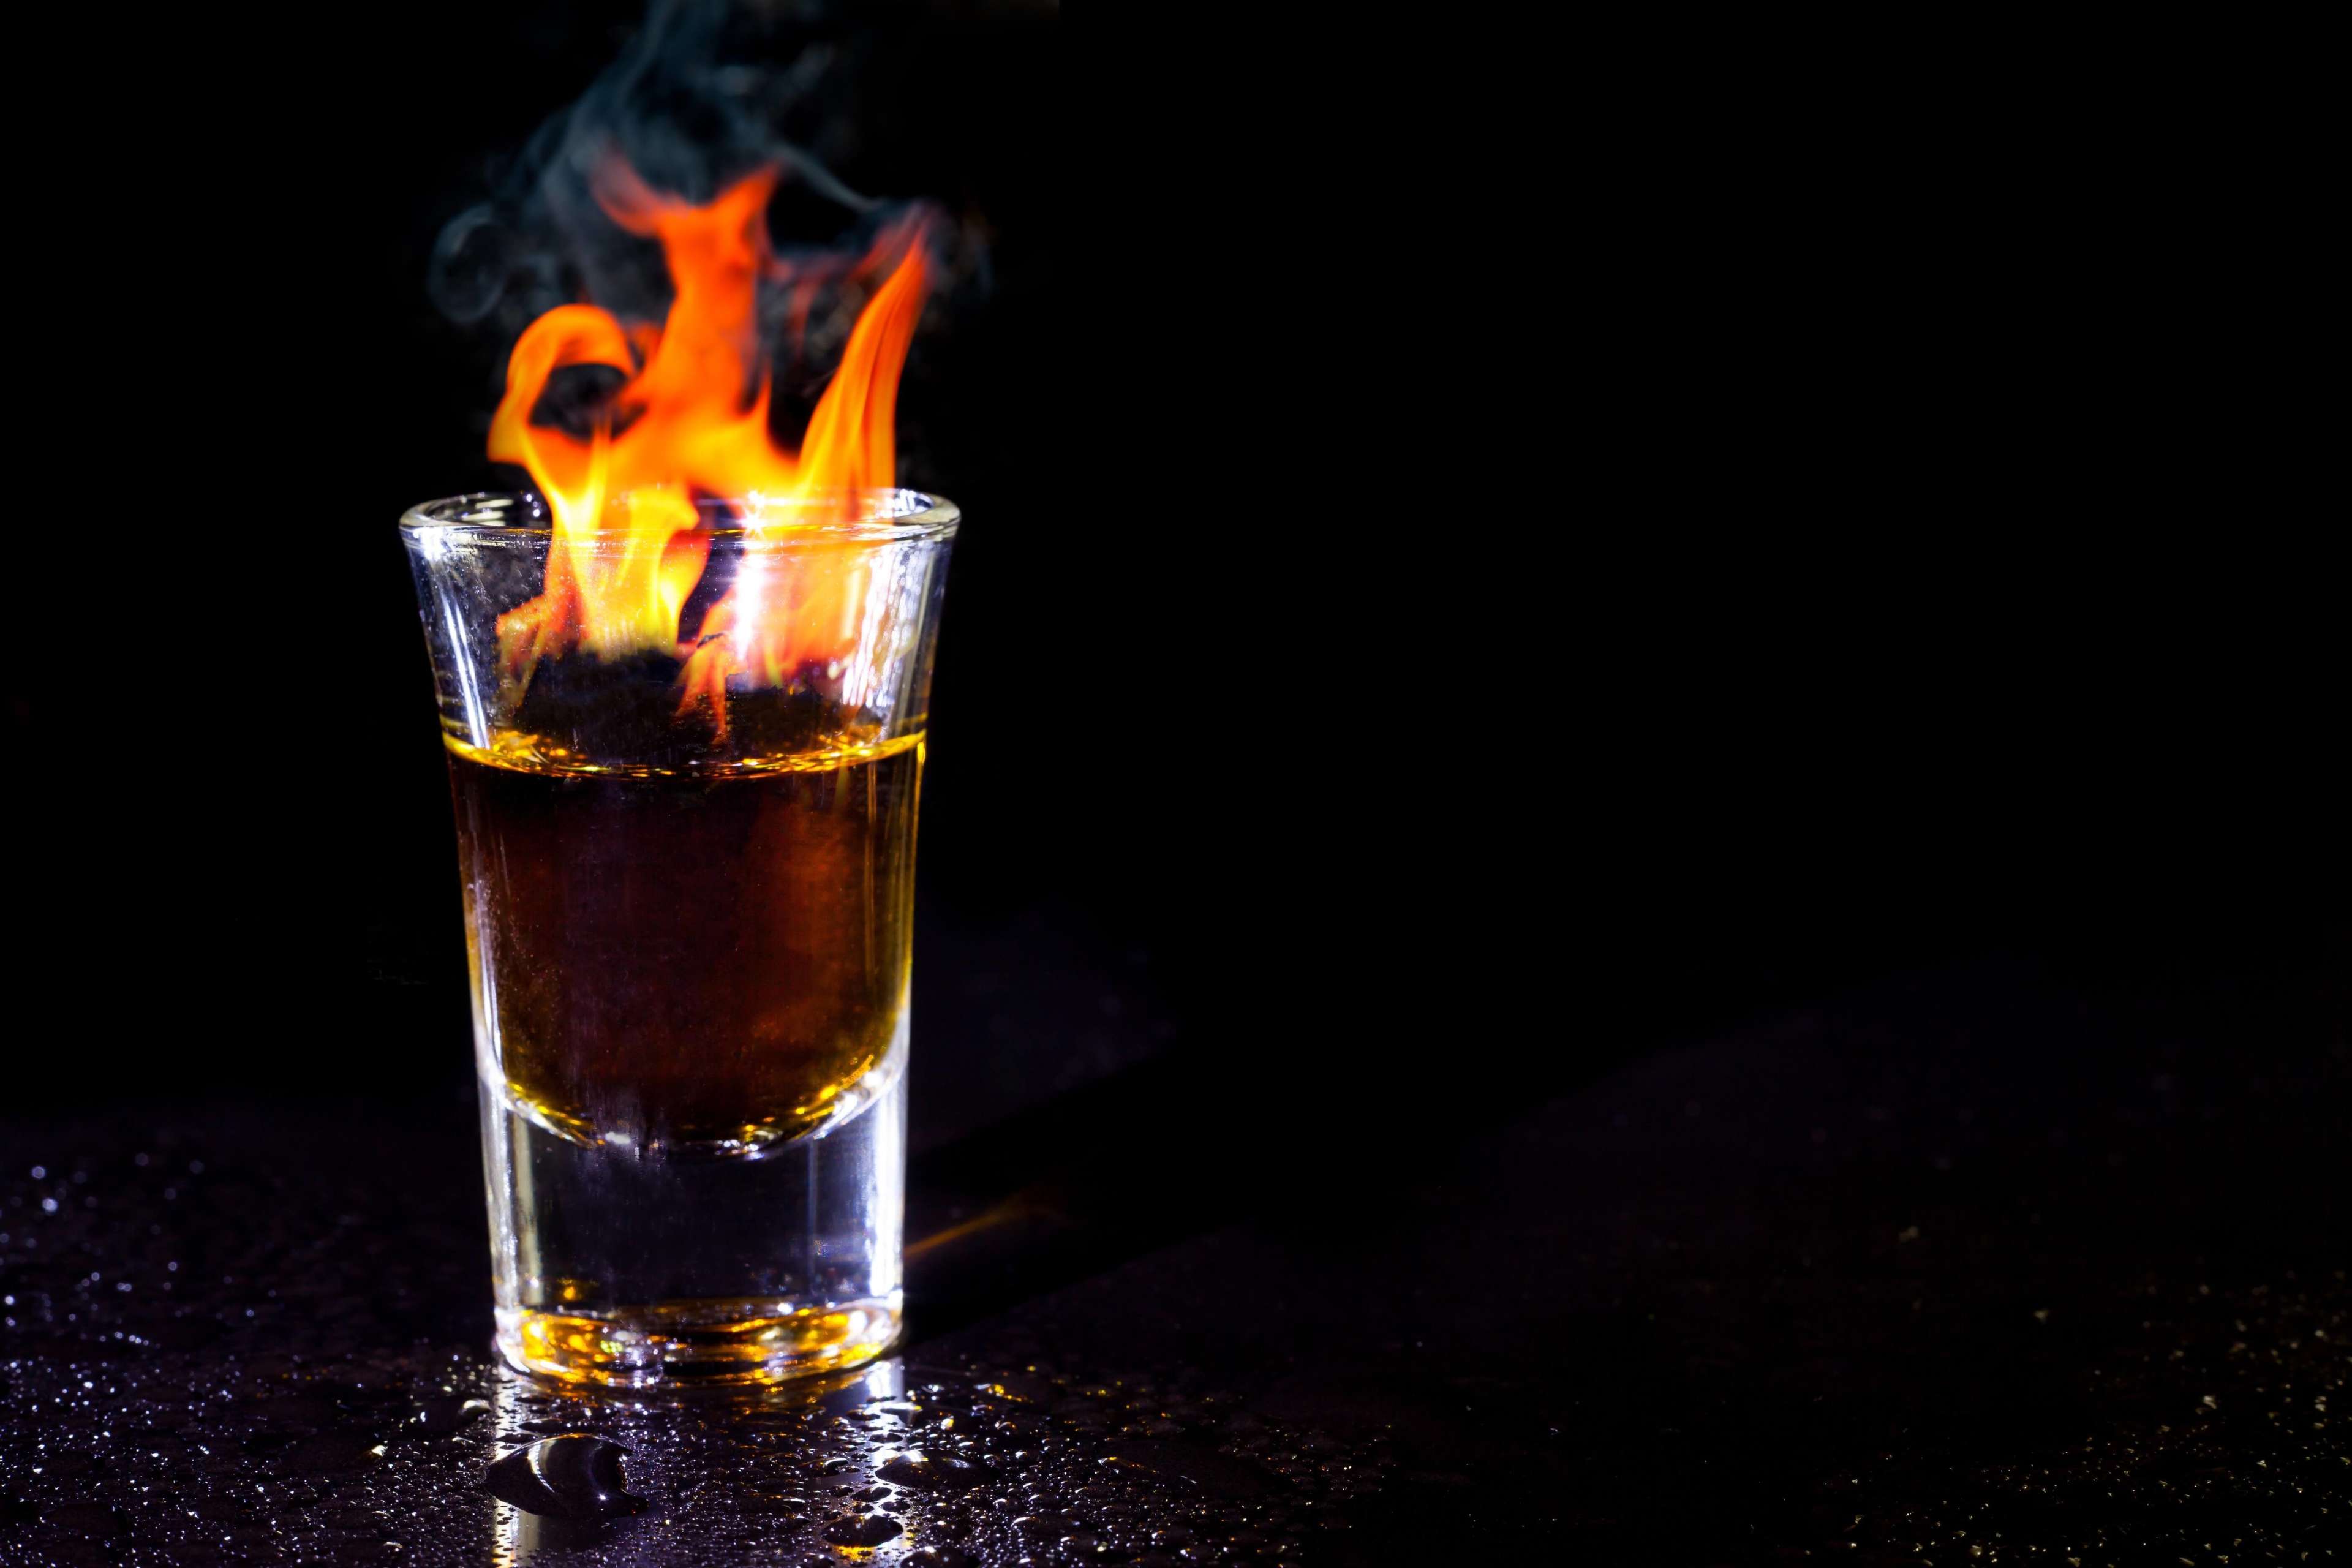 Hot alcoholic cocktail burning in shot glass